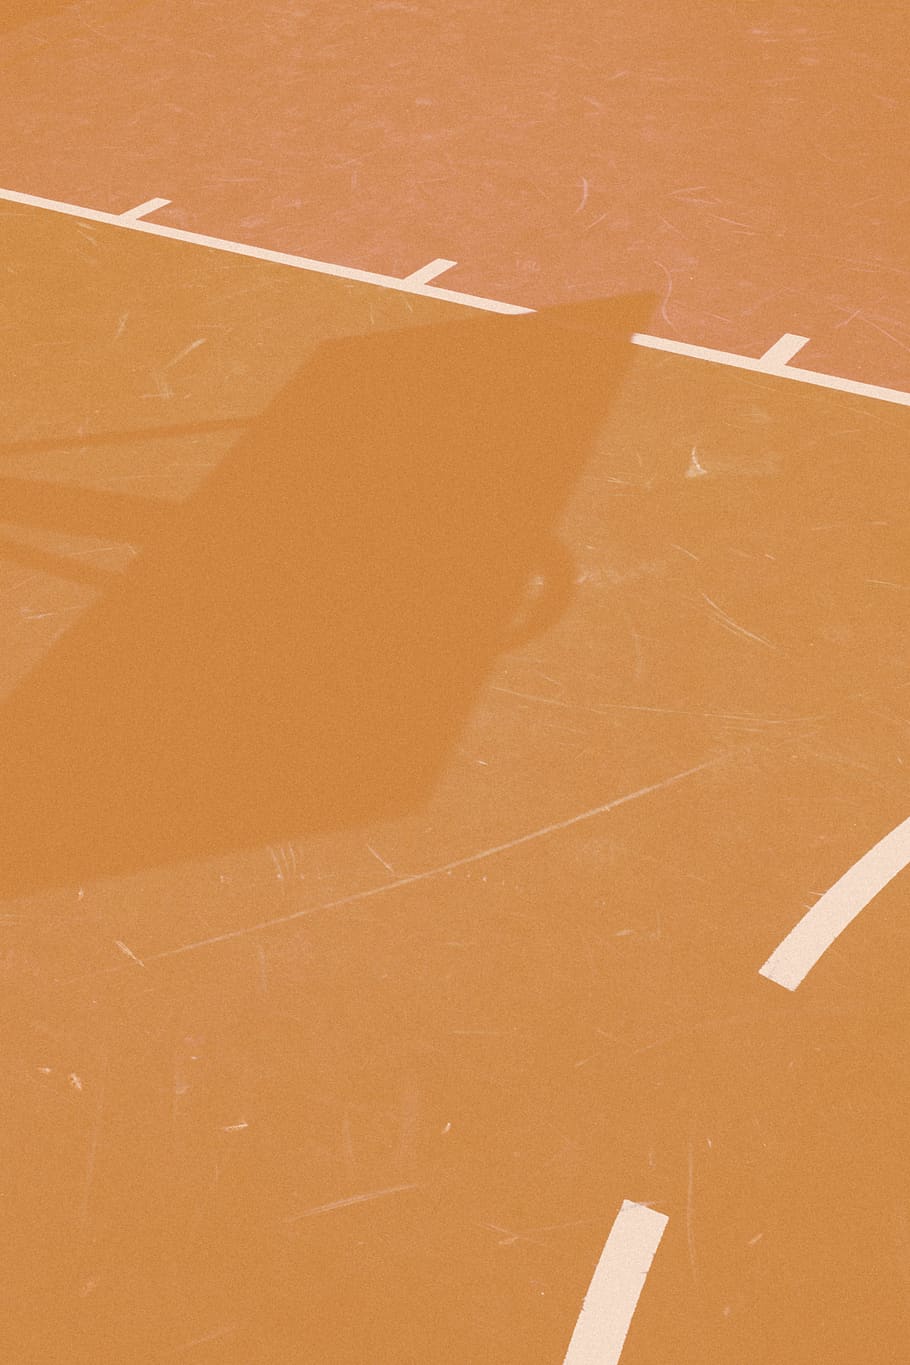 basketball hoop casting shadow on line, canada, montreal, court